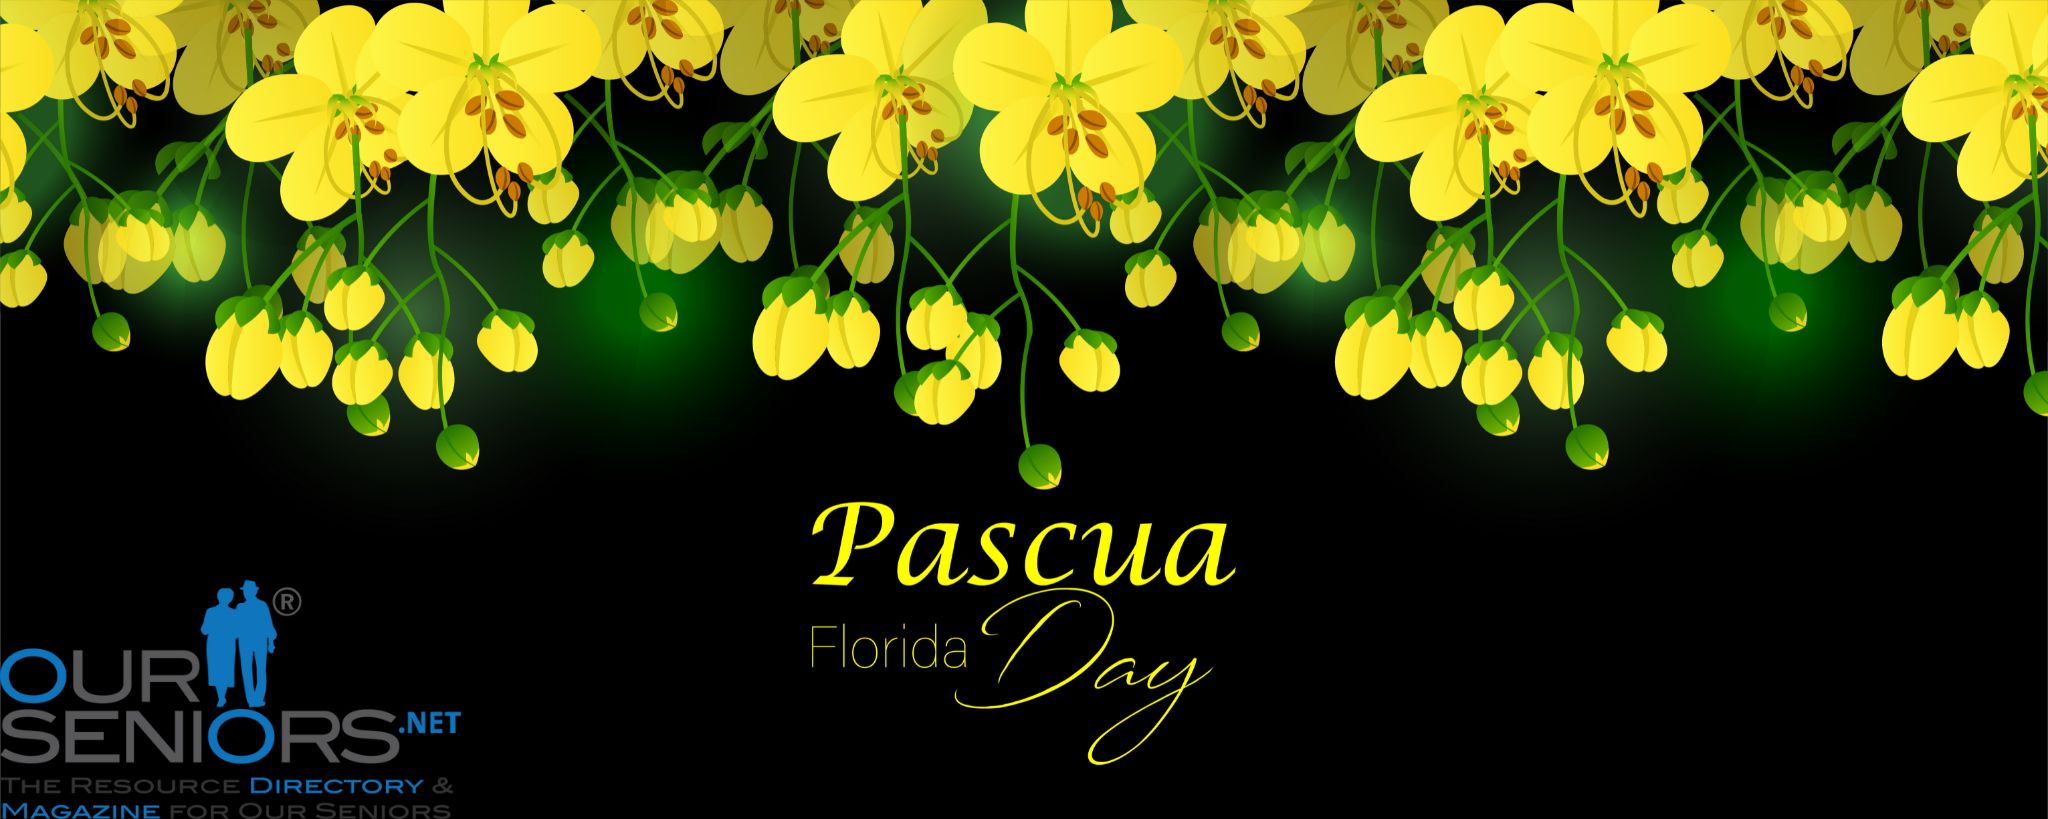 ourseniors.net-Pascua Florida Day: Do You the Story?